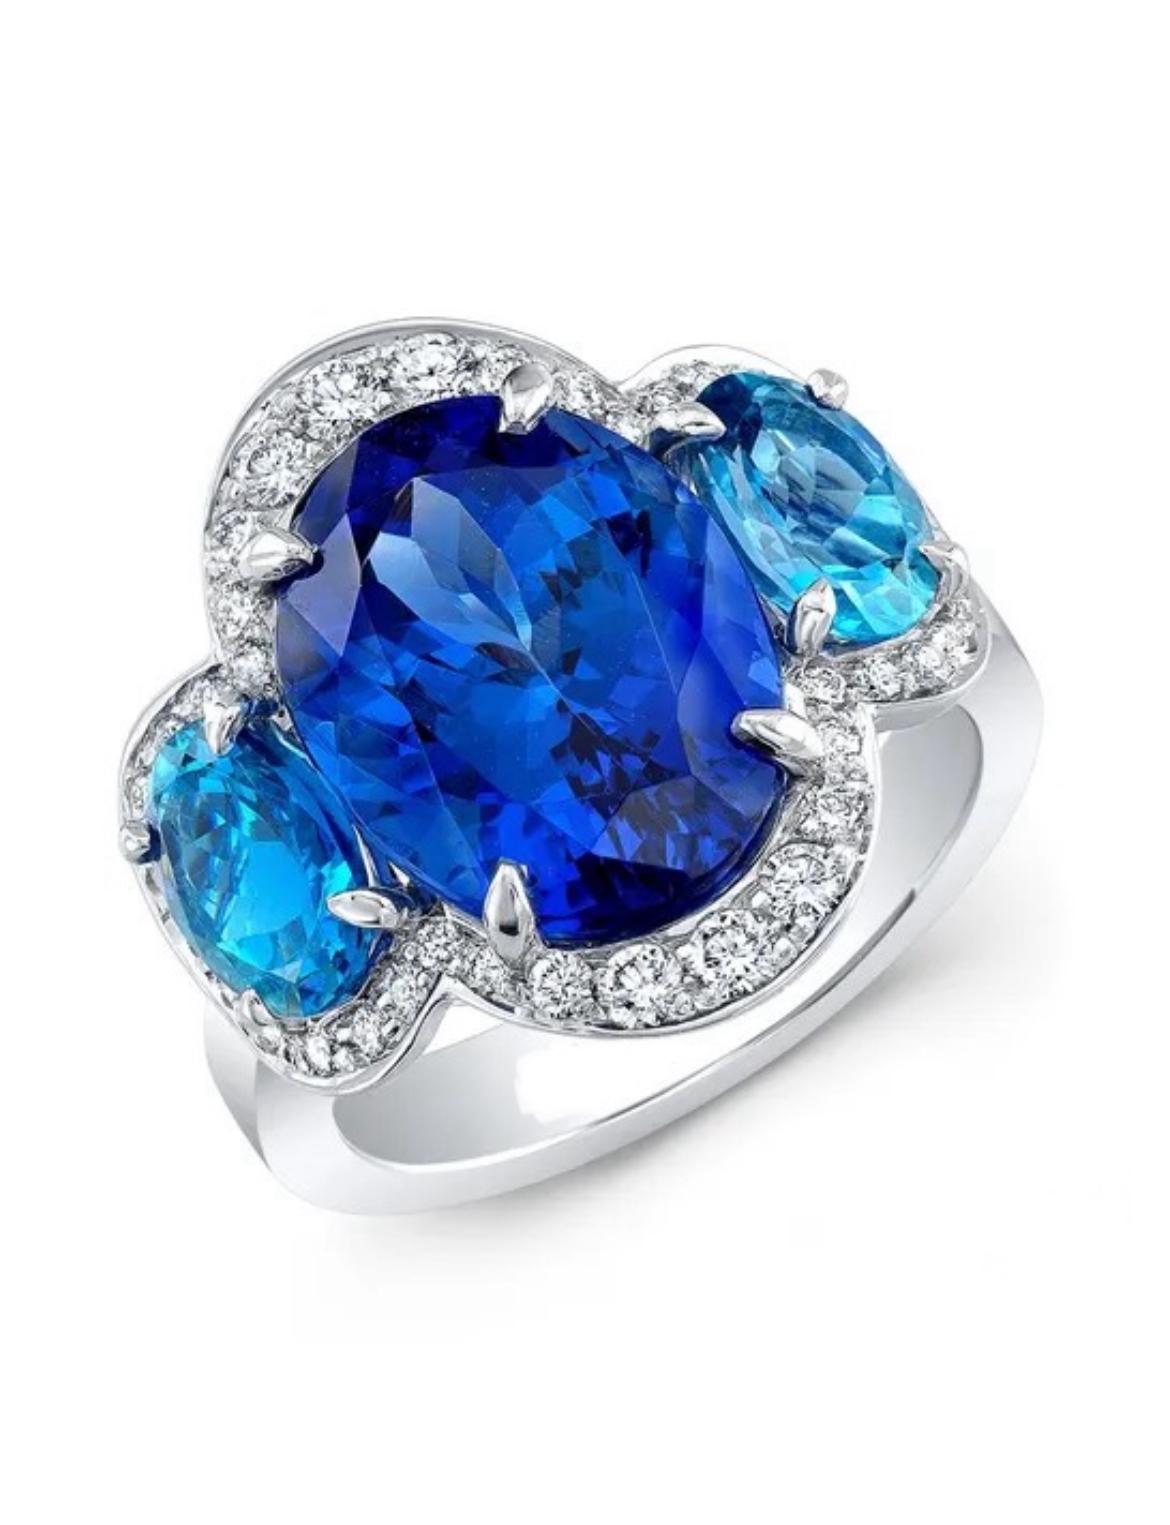 A delightful 6.70-carat Tanzanite is graciously supported by two aquamarines weighing 1.44 carats, accented by numerous shimmering white diamonds totaling 0.49 carats, fabricated in 18K white gold. 